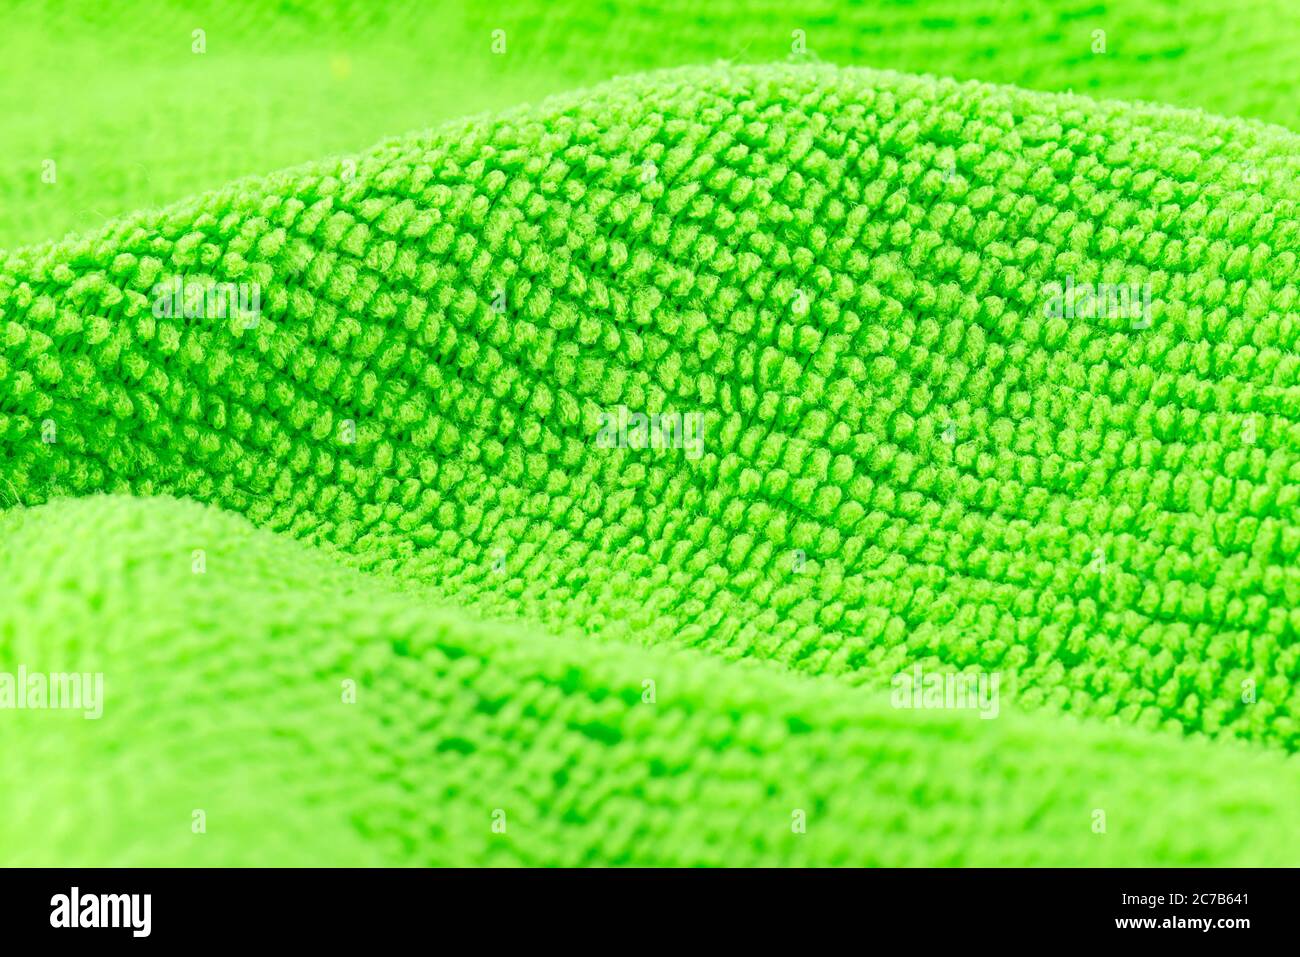 Background made of green microfiber fabric, selective focus. Stock Photo